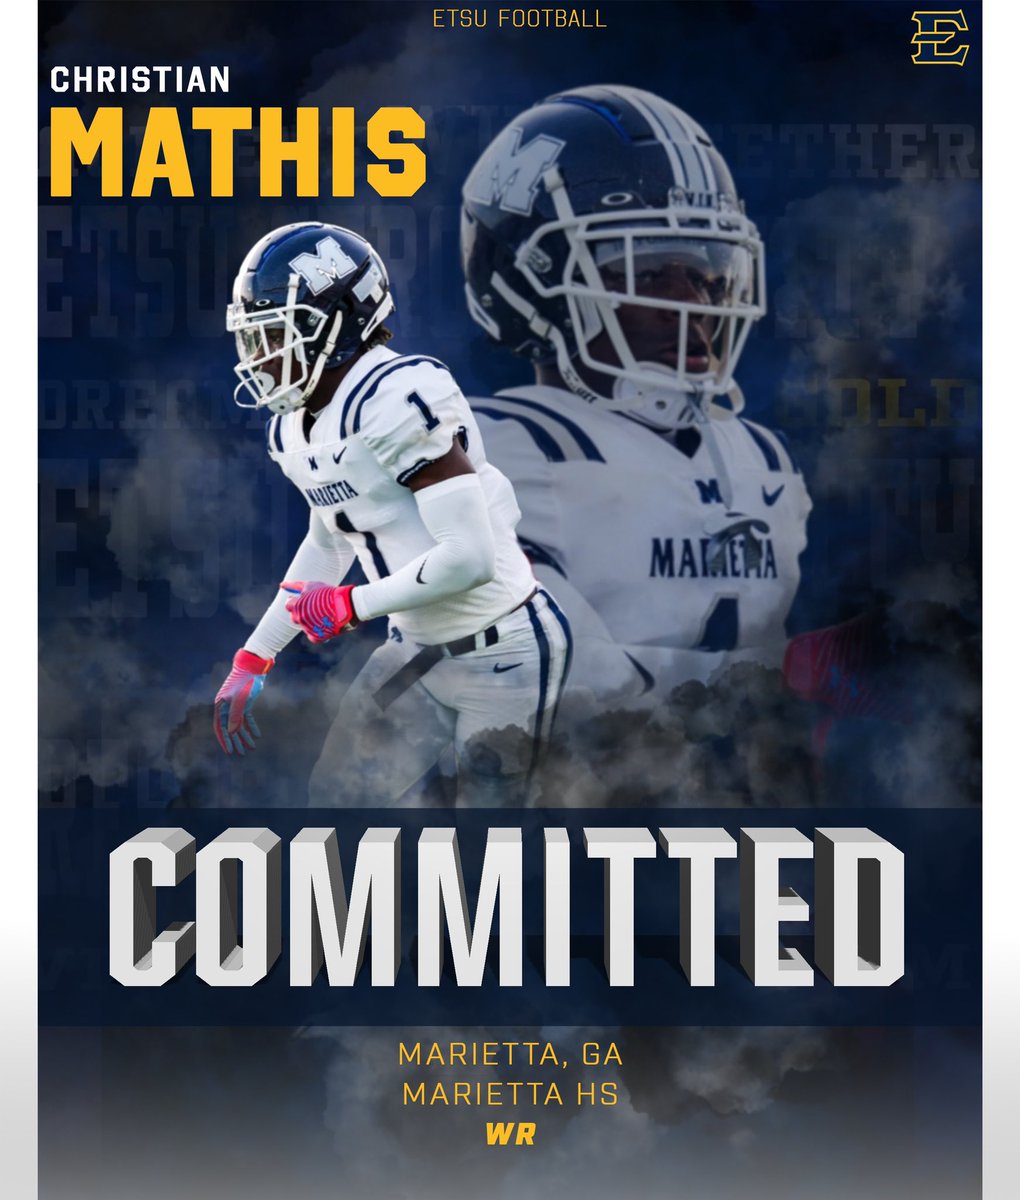 Committed‼️ @CoachJoeHorn @ETSUFootball @gwquarles @MHSFBFAMILY @Mansell247 @MaTYiCE03 @TEwracademy